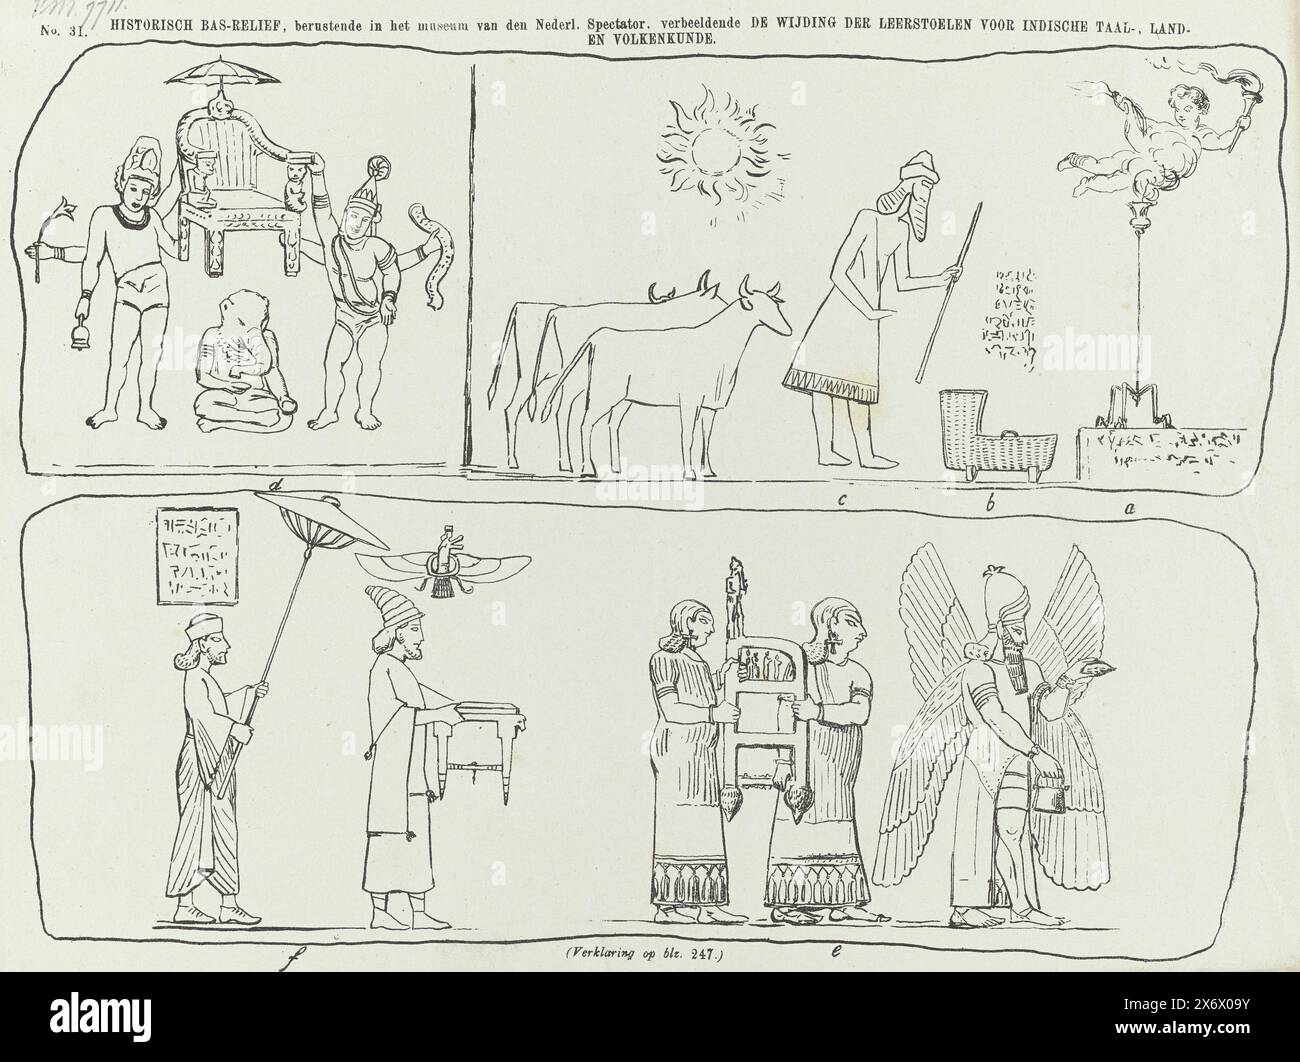 Cartoon on the bill for higher education in Indian language, geography and ethnology, 1864, Historical bas-relief, housed in the Van den Nederl Museum. Spectator, depicting The Consecration of Chairs for Indian Language, Geography and Ethnology (title on object), Cartoon on the bill for higher education in Indian language, geography and ethnology. Three representations in the form of bas-reliefs in which three chairs are incorporated. Plate published in the weekly magazine De Nederlandsche Spectator, no. 31, July 30, 1864., print, print maker: Johan Michaël Schmidt Crans, printer: H.L. Smits Stock Photo